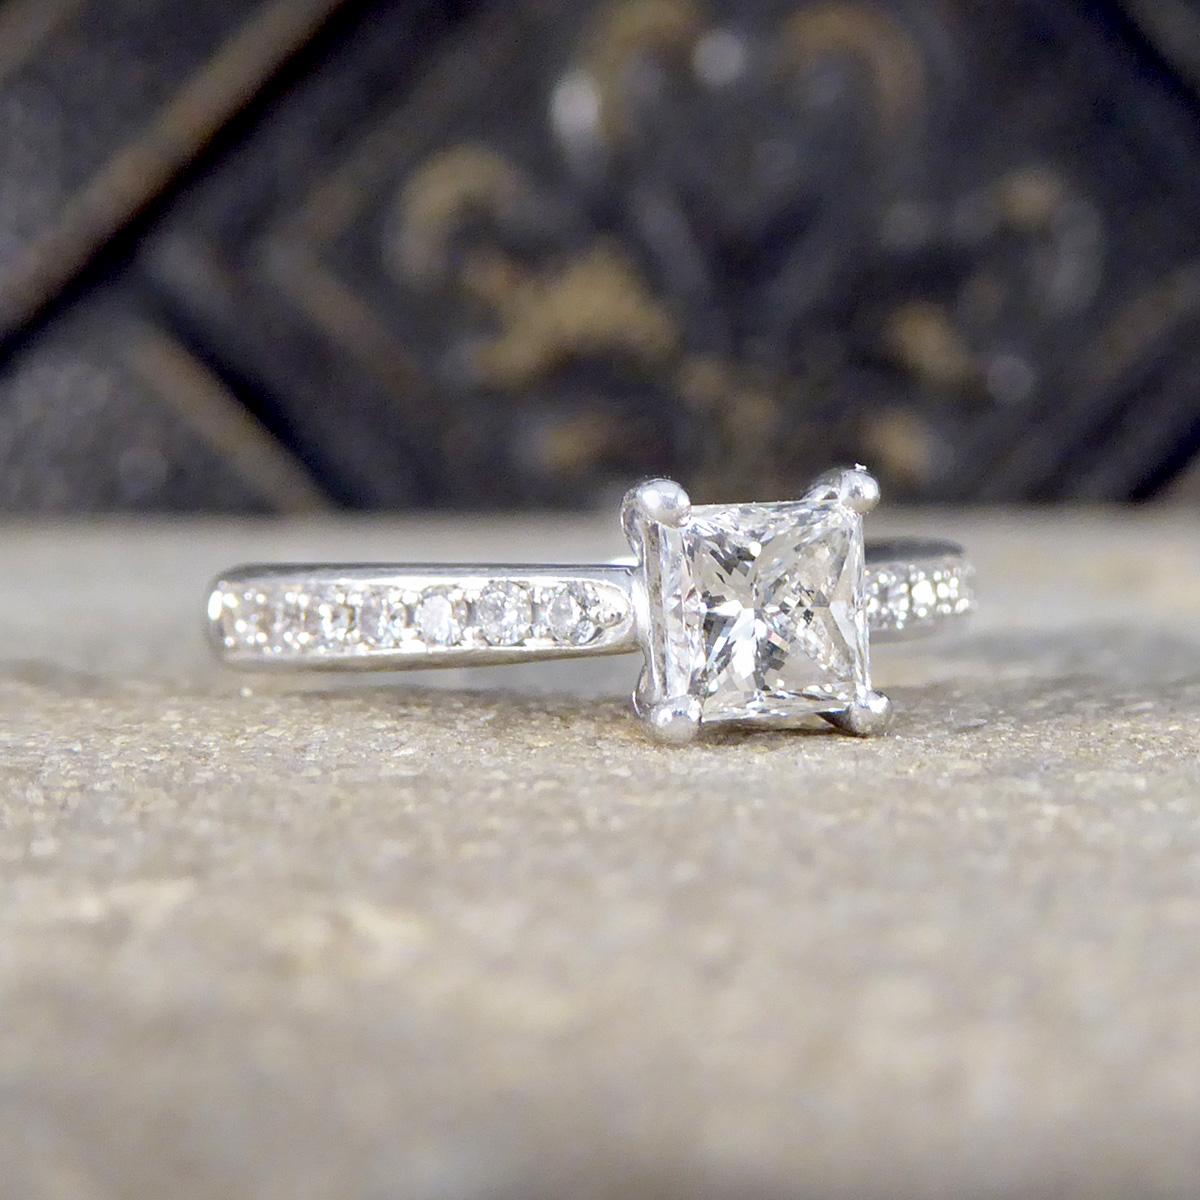 Discover the elegance of our 0.51ct Princess Cut Diamond Engagement ring, designed with Diamond set shoulders in Platinum. At its centre, a dazzling 0.51ct Princess Cut Diamond shines brilliantly, set in a refined platinum band, the Diamond has an